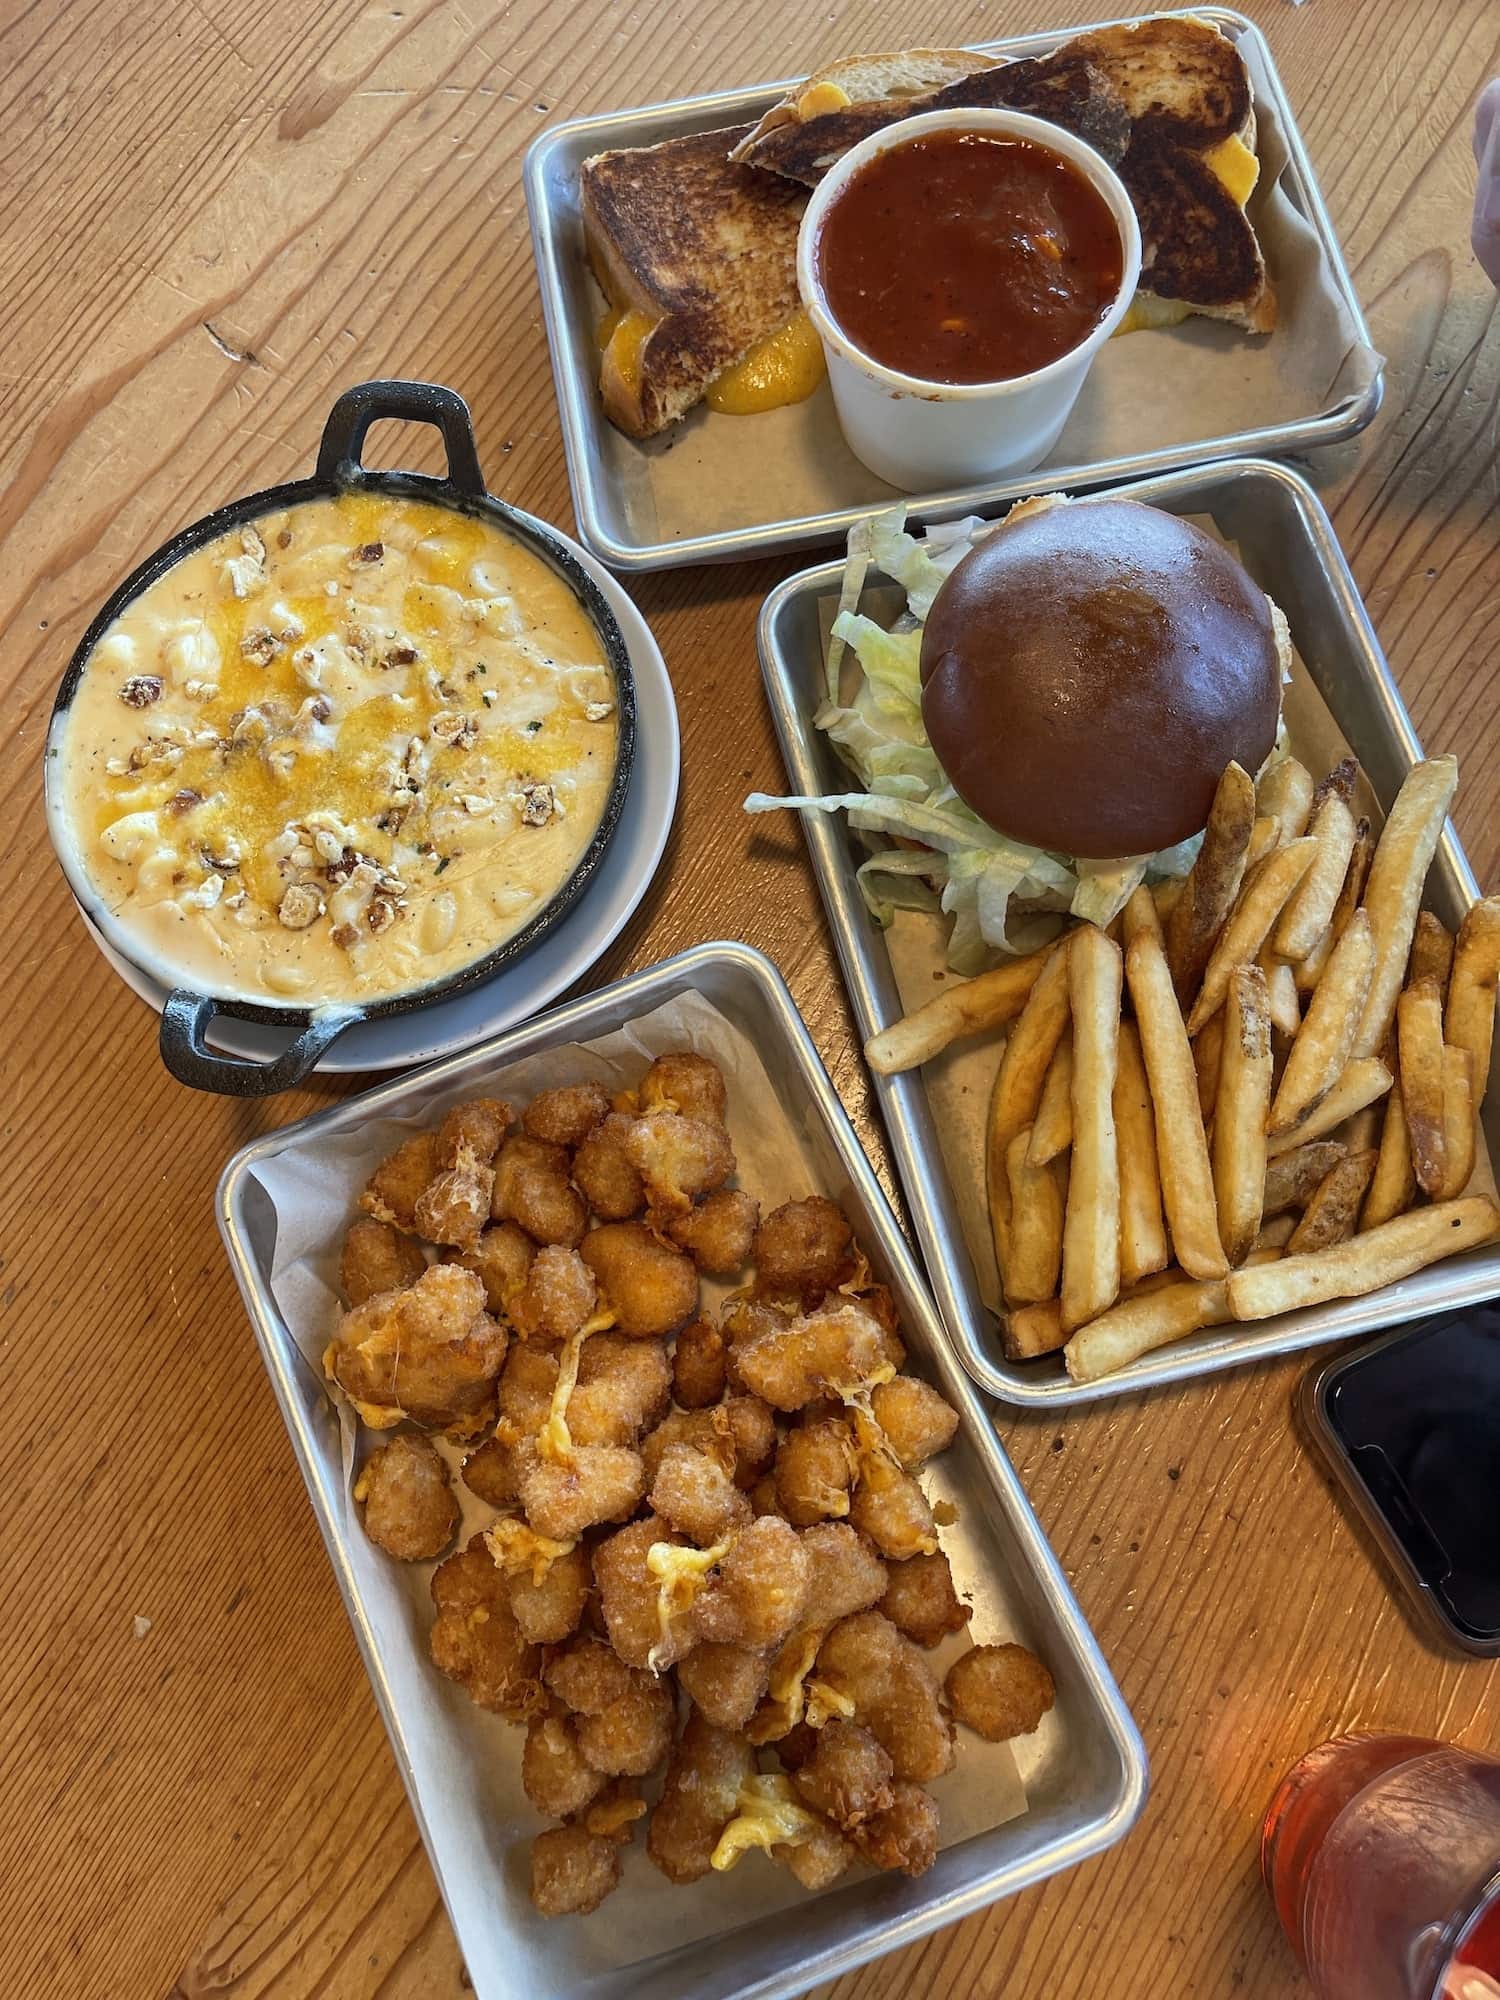 food from tillamook, mac and cheese, cheese curds, fries, cheeseburger, grilled cheese and tomato soup